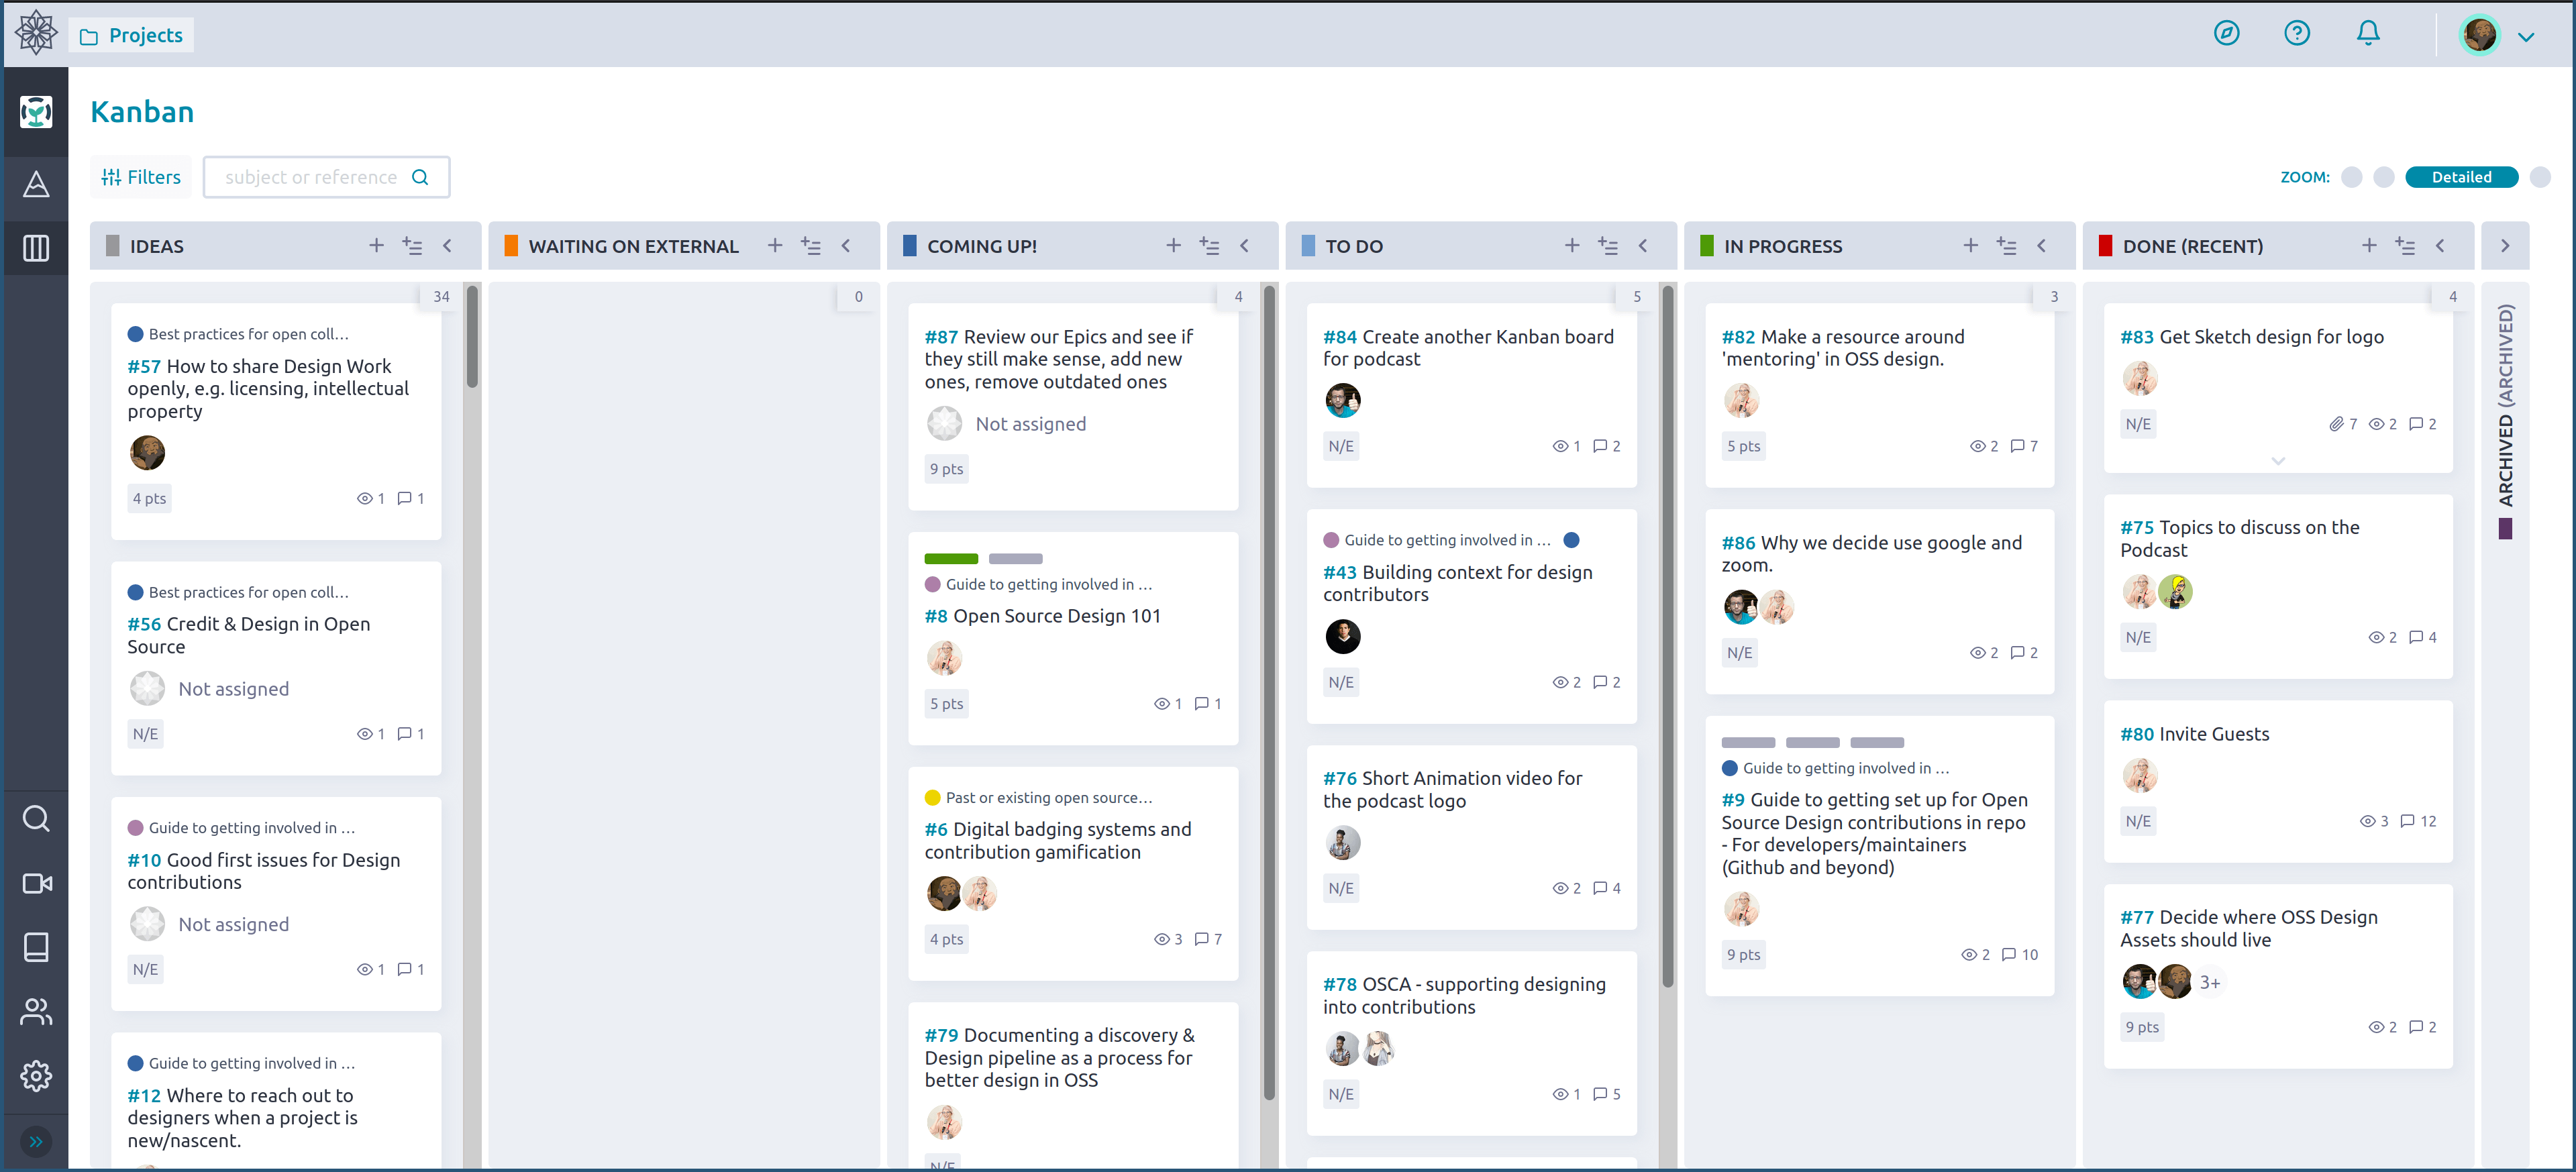 Taiga.io project board screenshot. Used in the Sustain OSS Design & UX Working Group